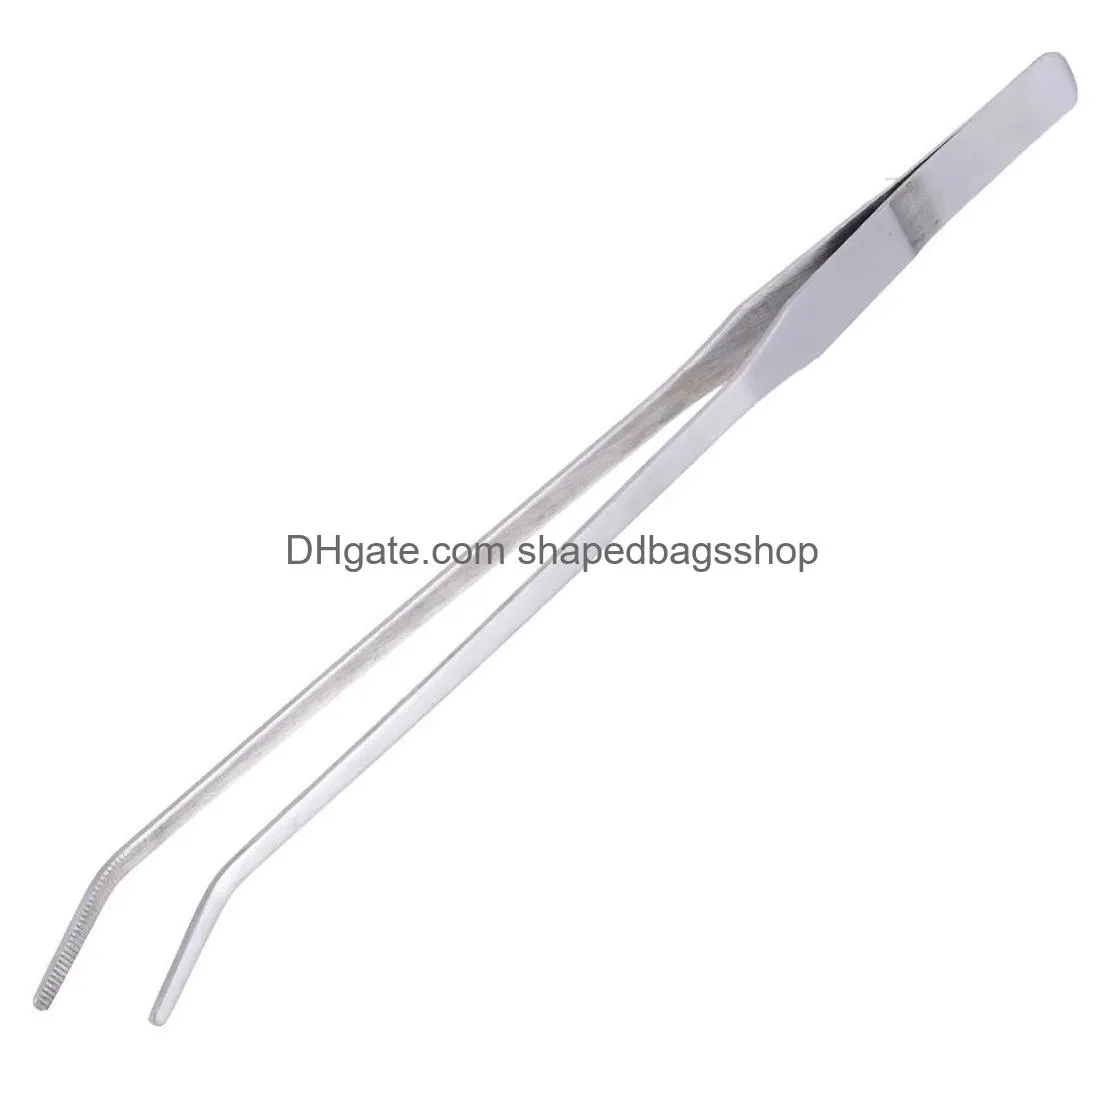 Cleaning Tools 27Cm Aquarium Live Tank Straight Curve Plant Tweezers Long Tongs Stainless Steel Fish Tweezer Cleaning Clamp Tool P0712 Dht2S